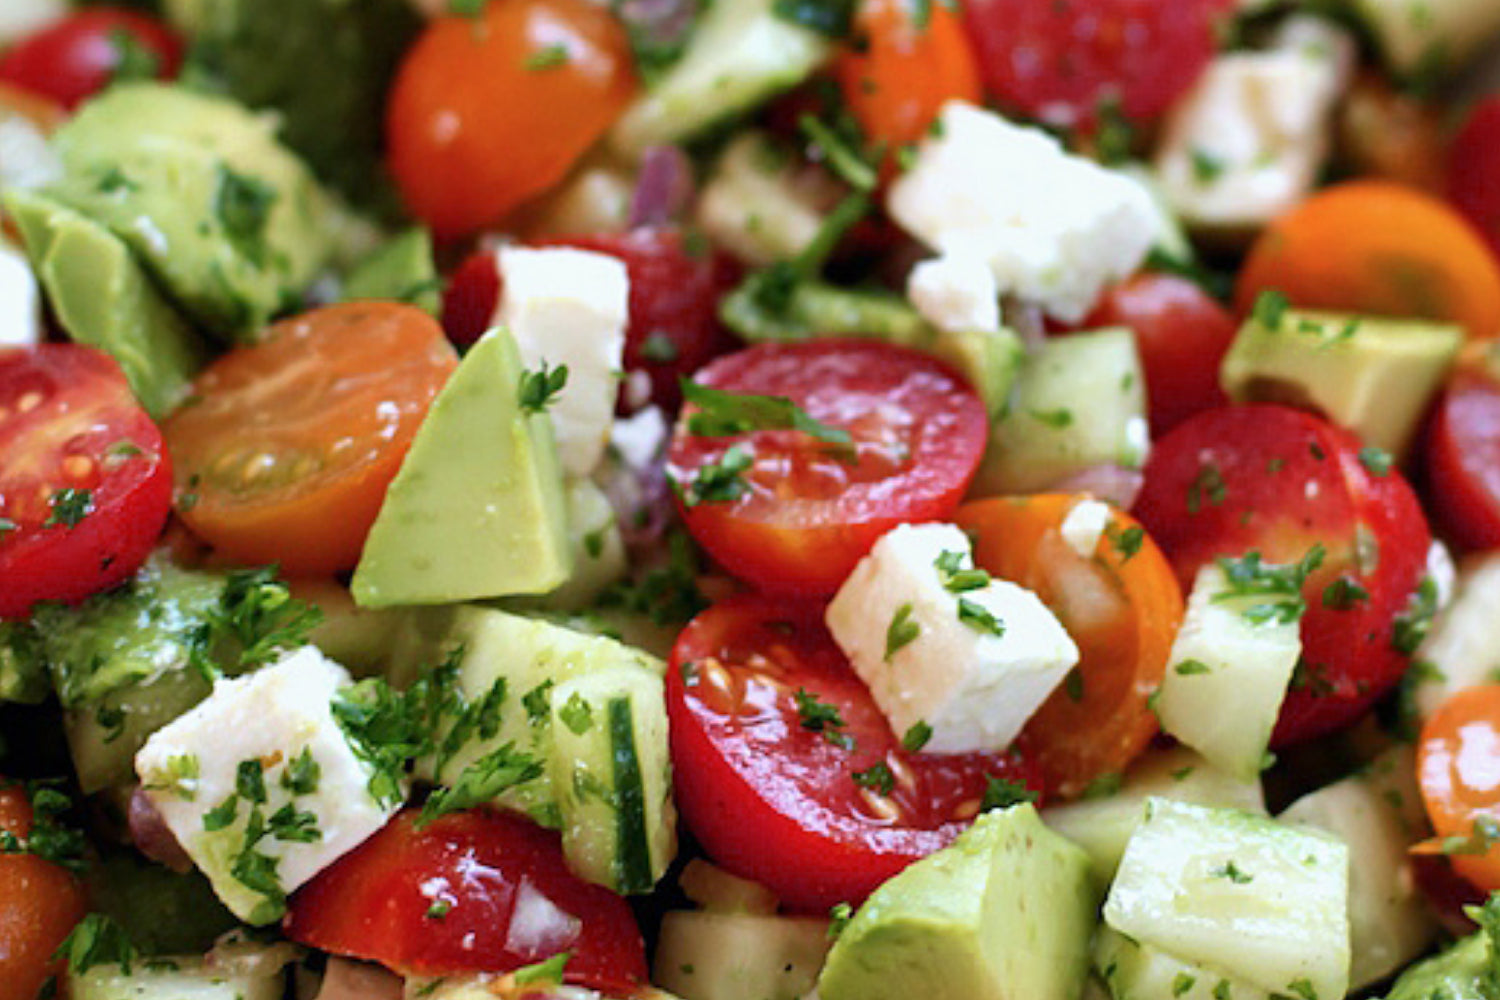 Avocado Salad with Tomatoes, Cucumber, and Feta